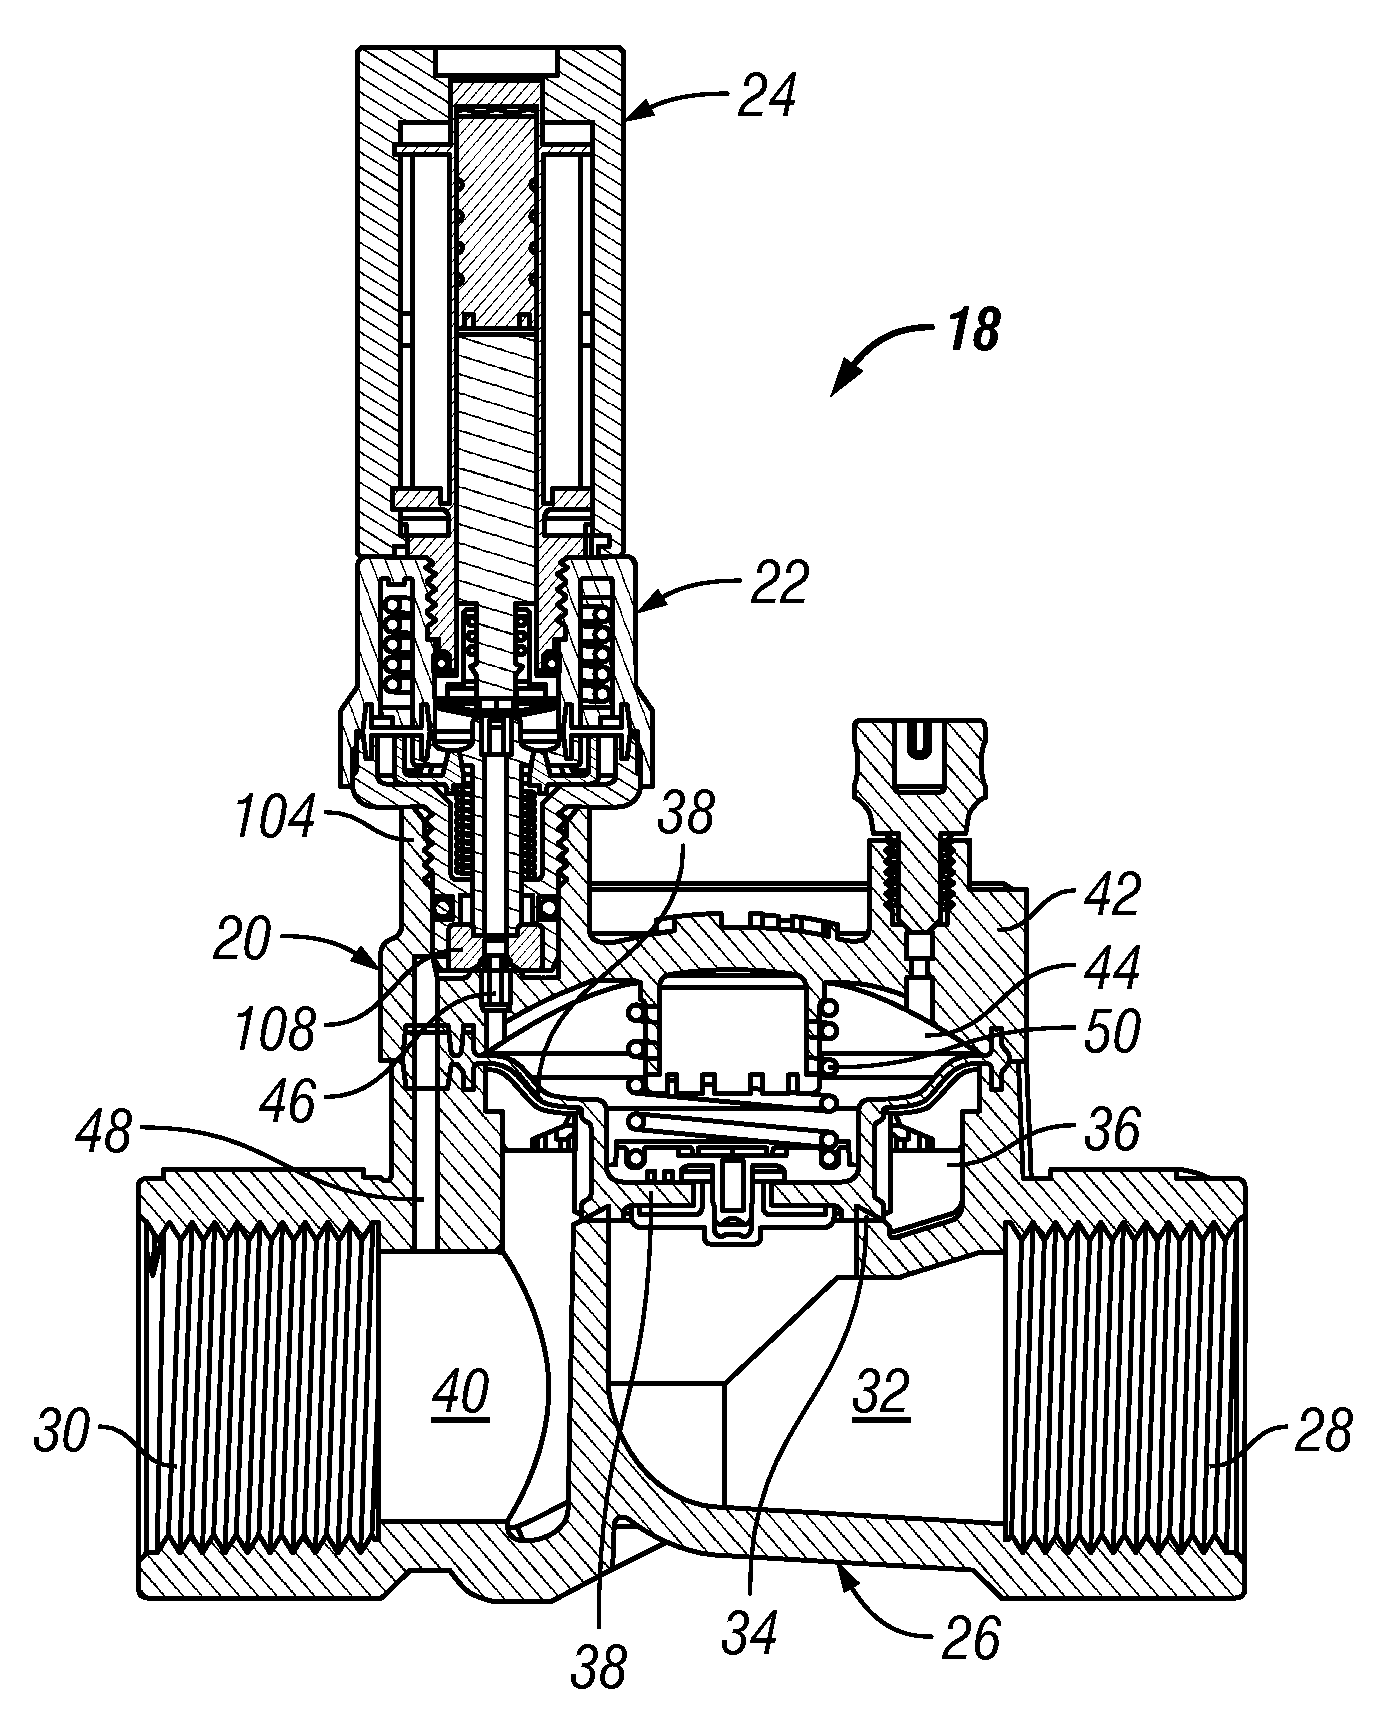 Co-axial solenoid and pressure regulator for diaphragm valve